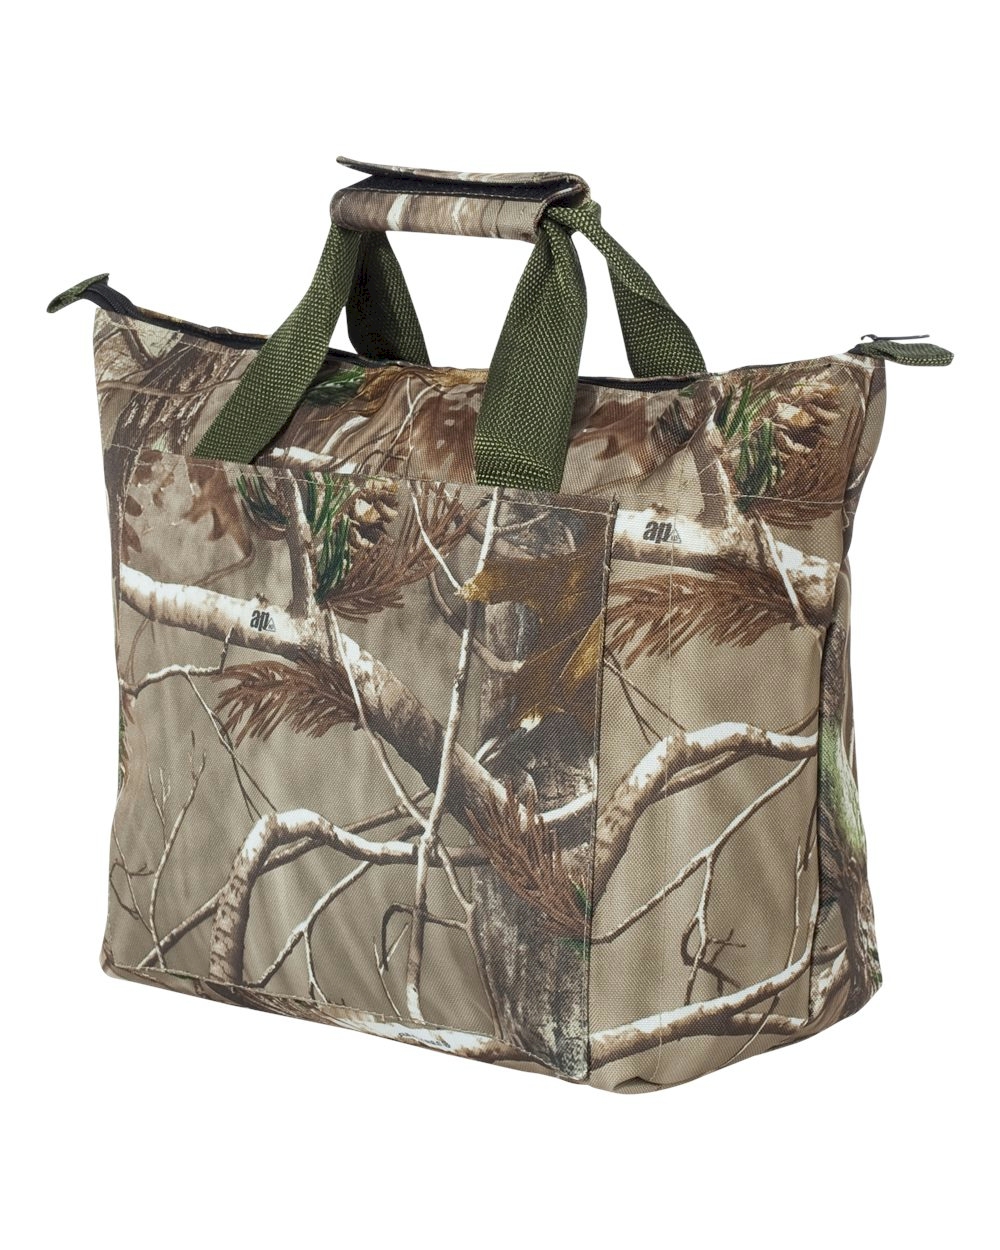 Realtree All Purpose Cooler/Lunch Bag